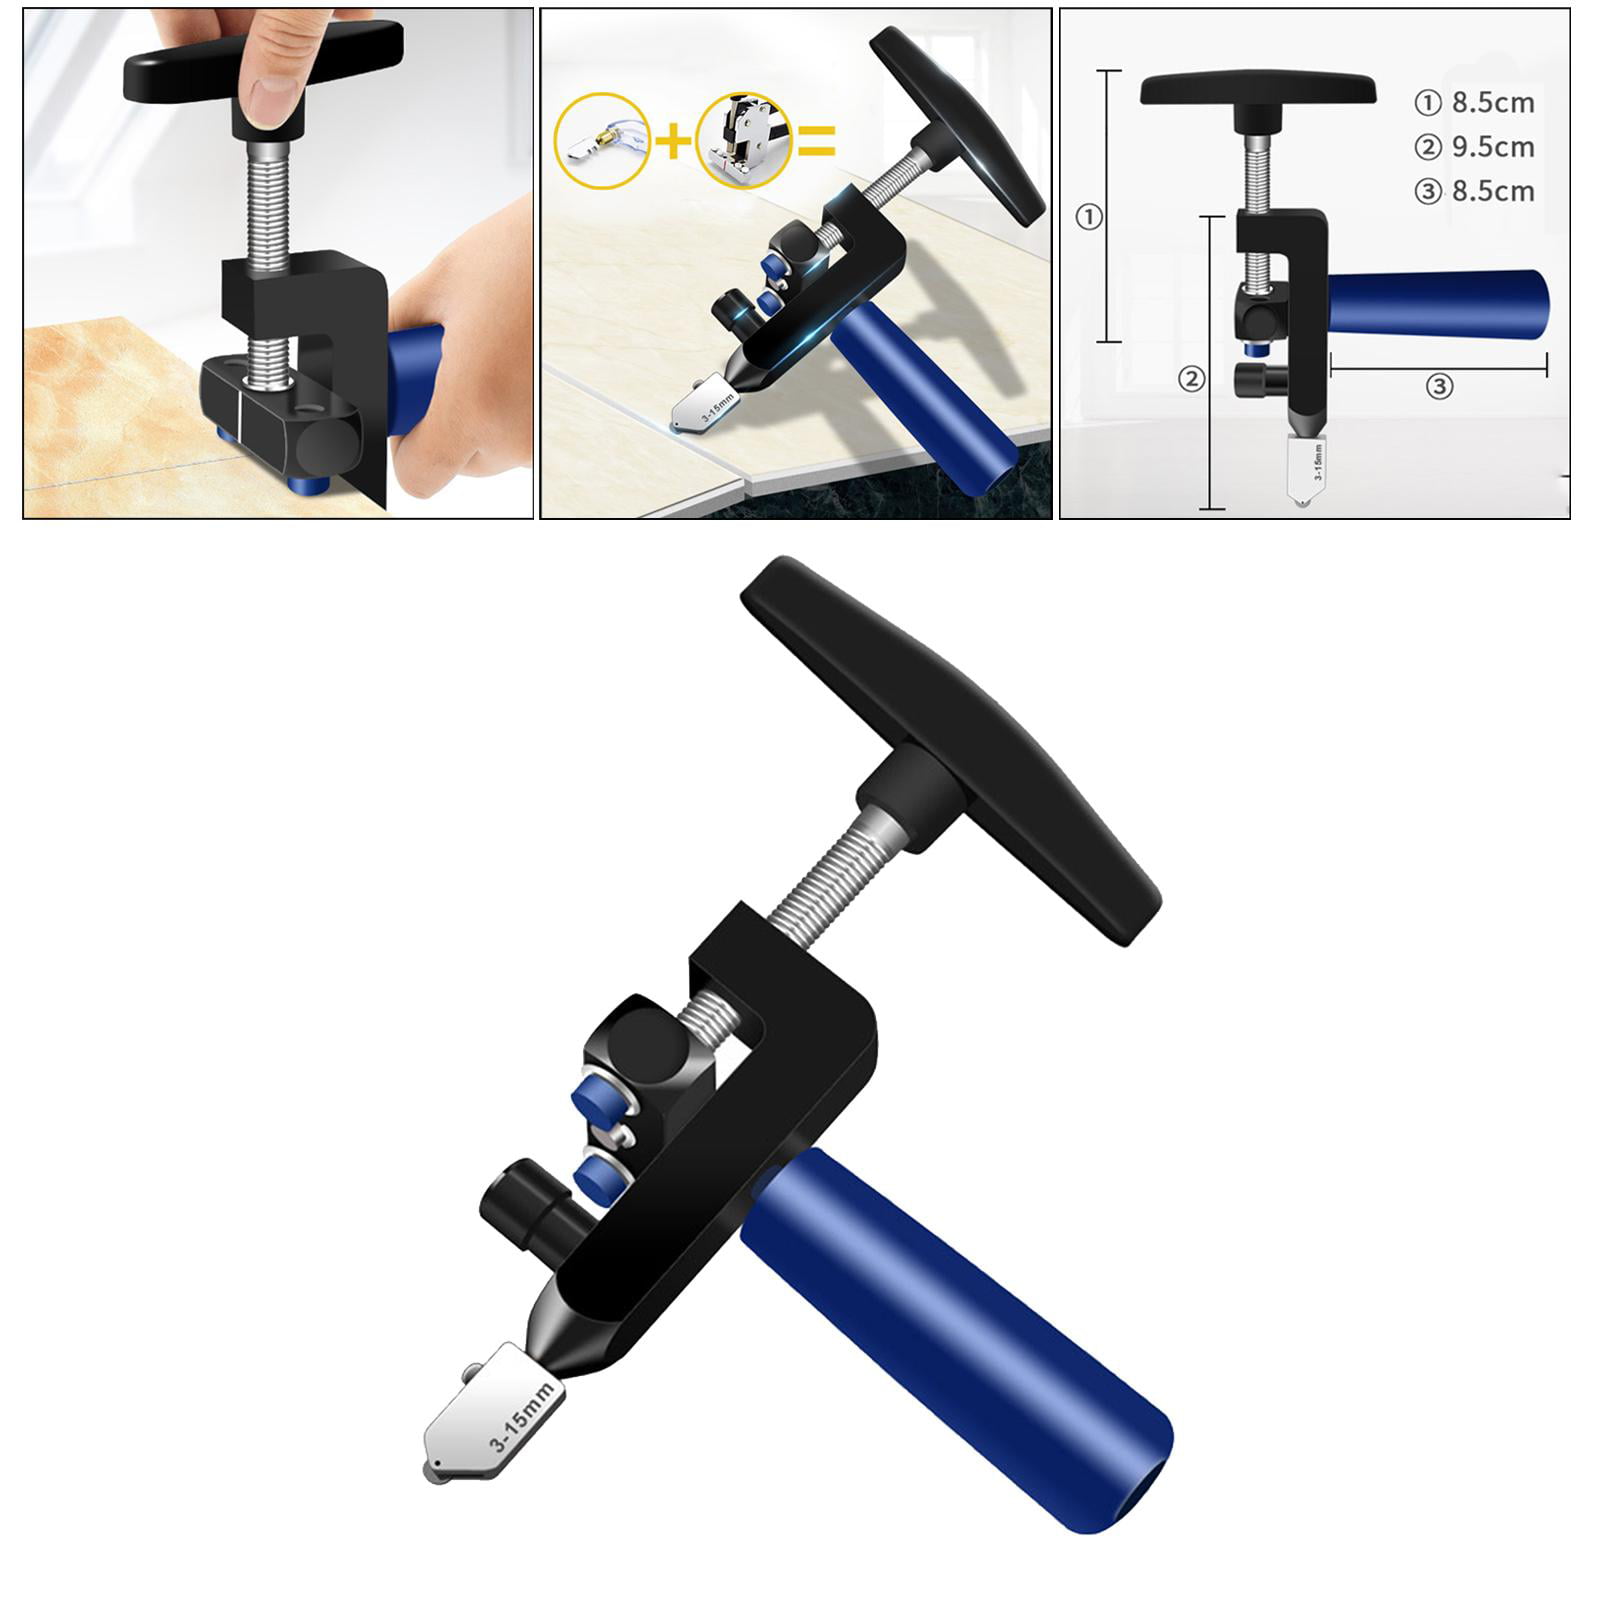 New GLASS and TILE CUTTER PLIERS Handheld Portable Mirror Opener Cutting Tools 